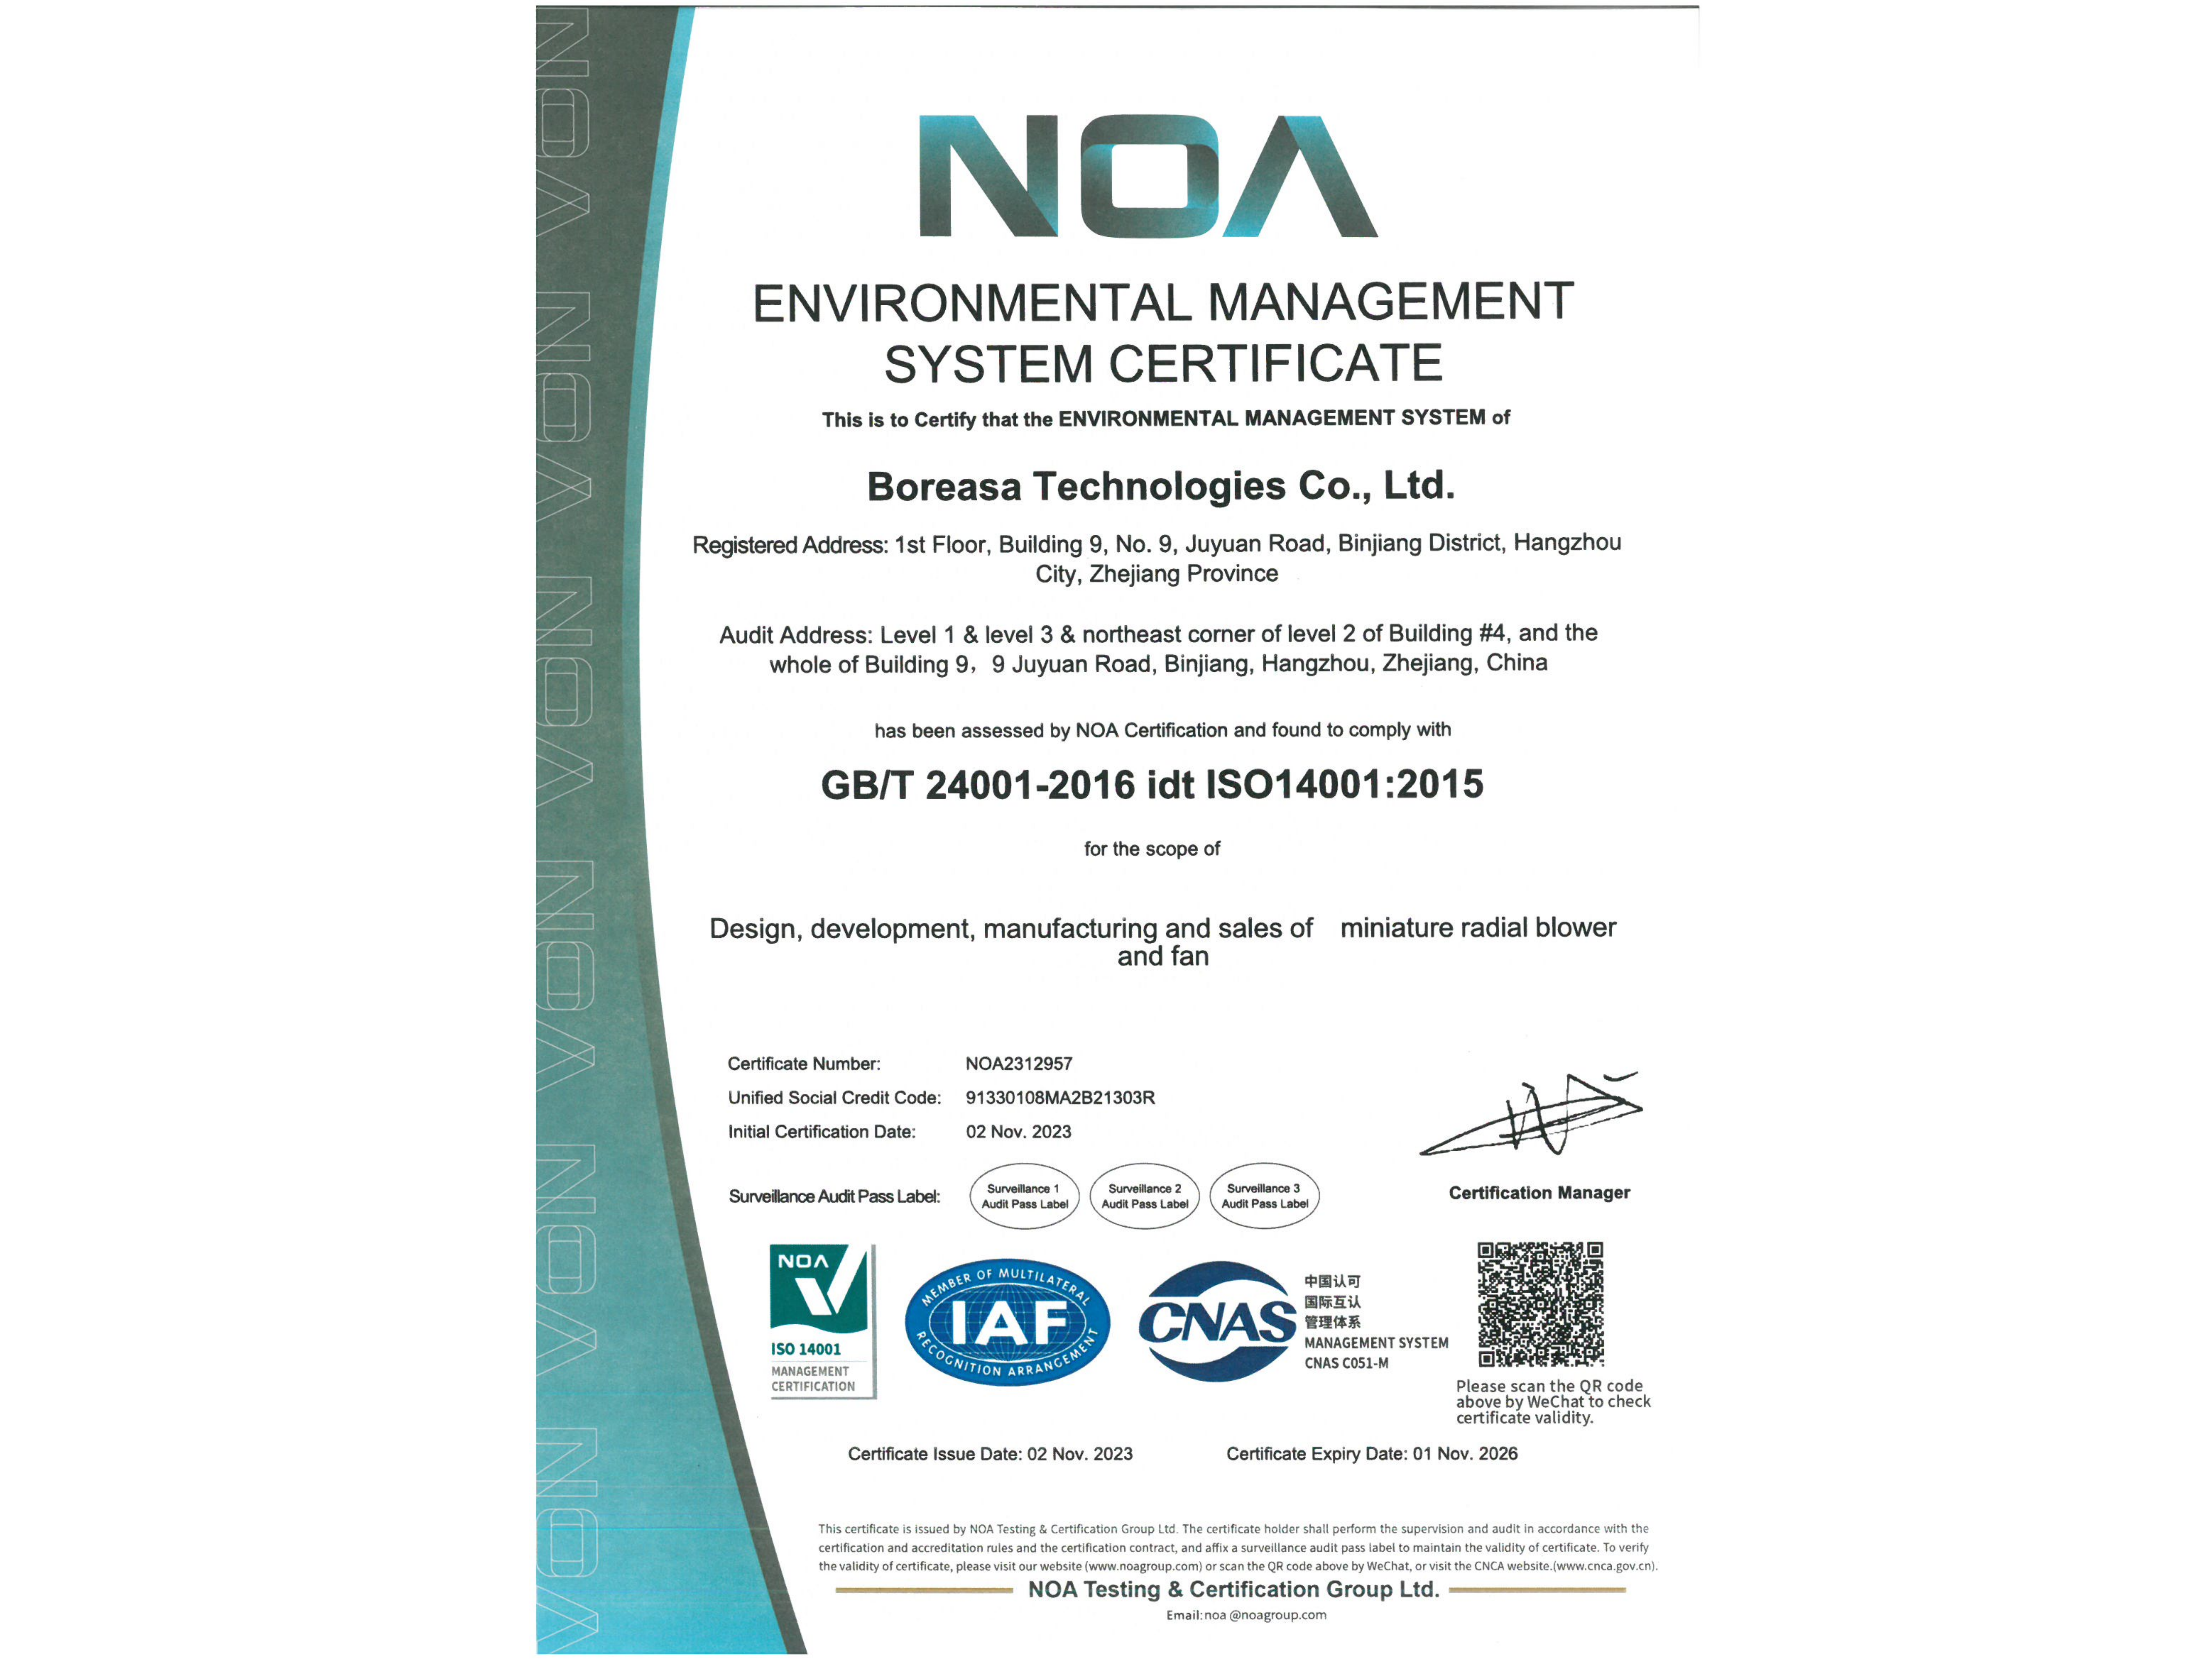 Boreasa was awarded ISO14001:2015 certification